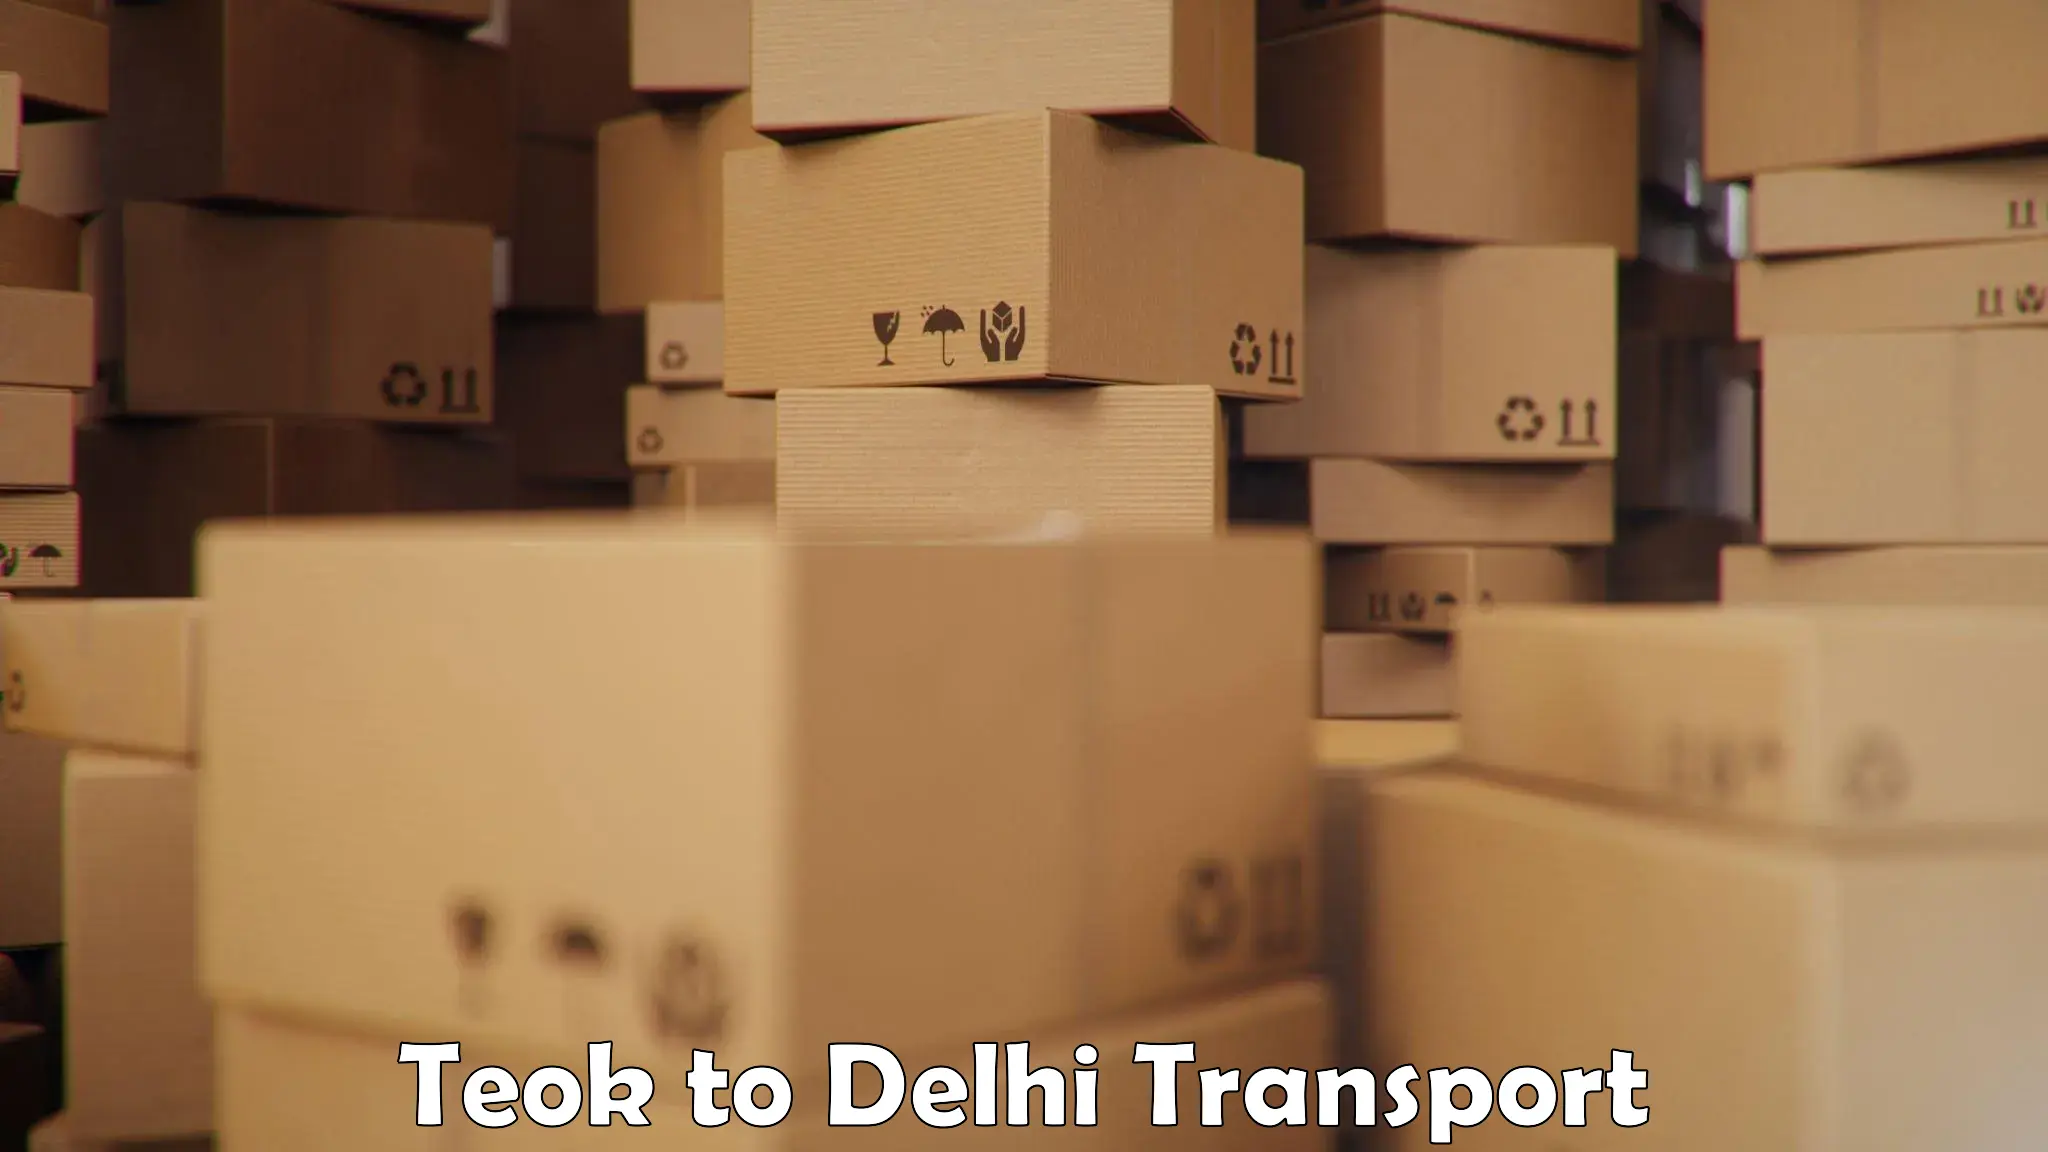 Daily transport service Teok to East Delhi